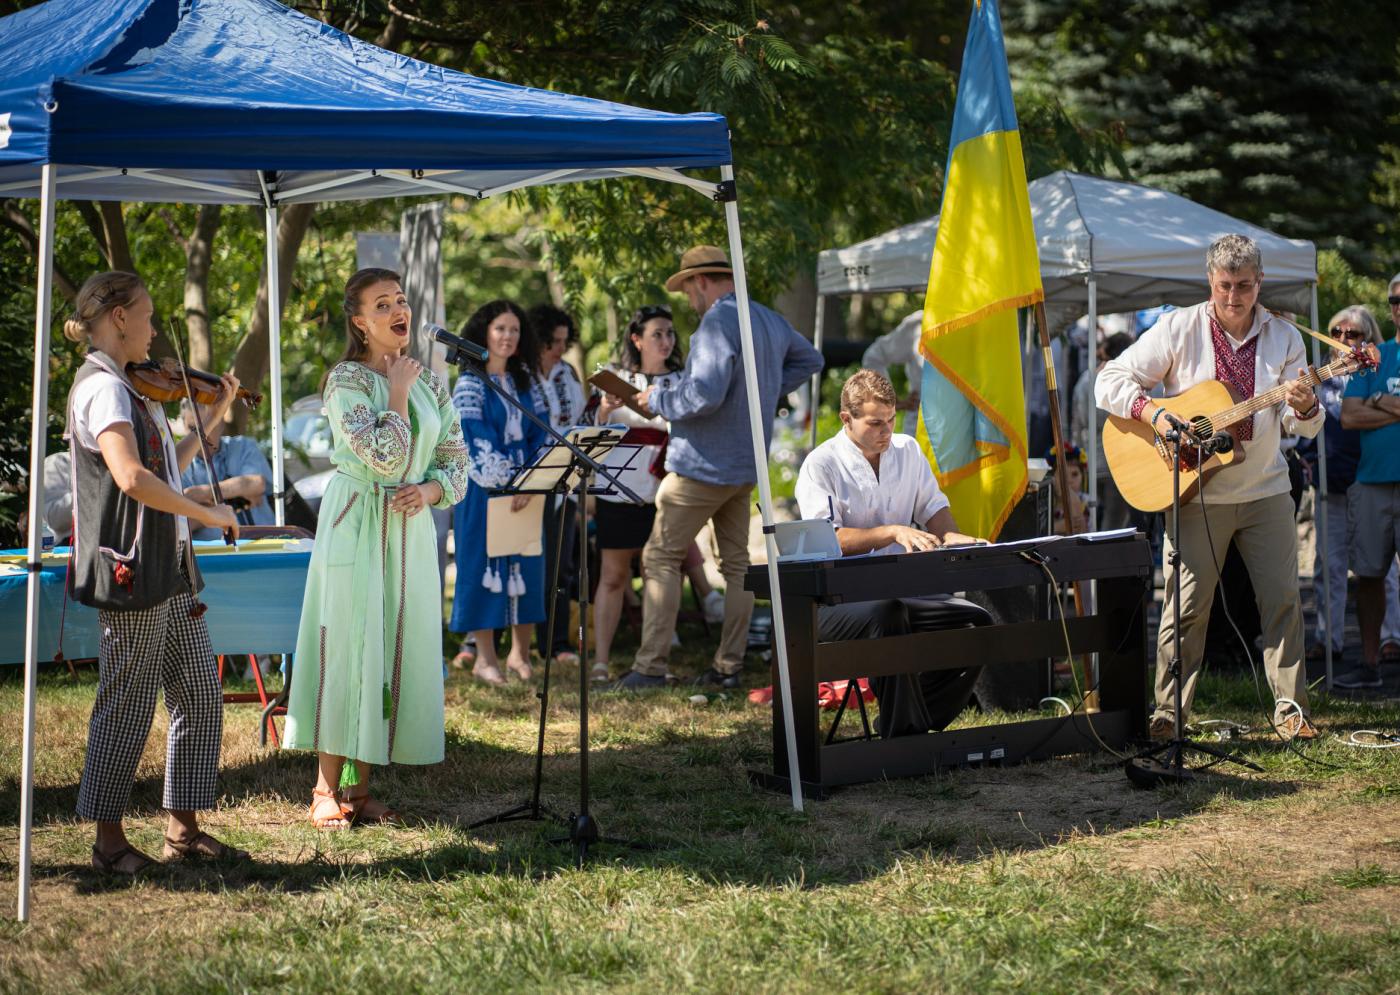 Olha Abakumova sang her country's national anthem at the Ukrainian Independence Day celebration held in August at Christ the King Ukrainian Church in Boston.